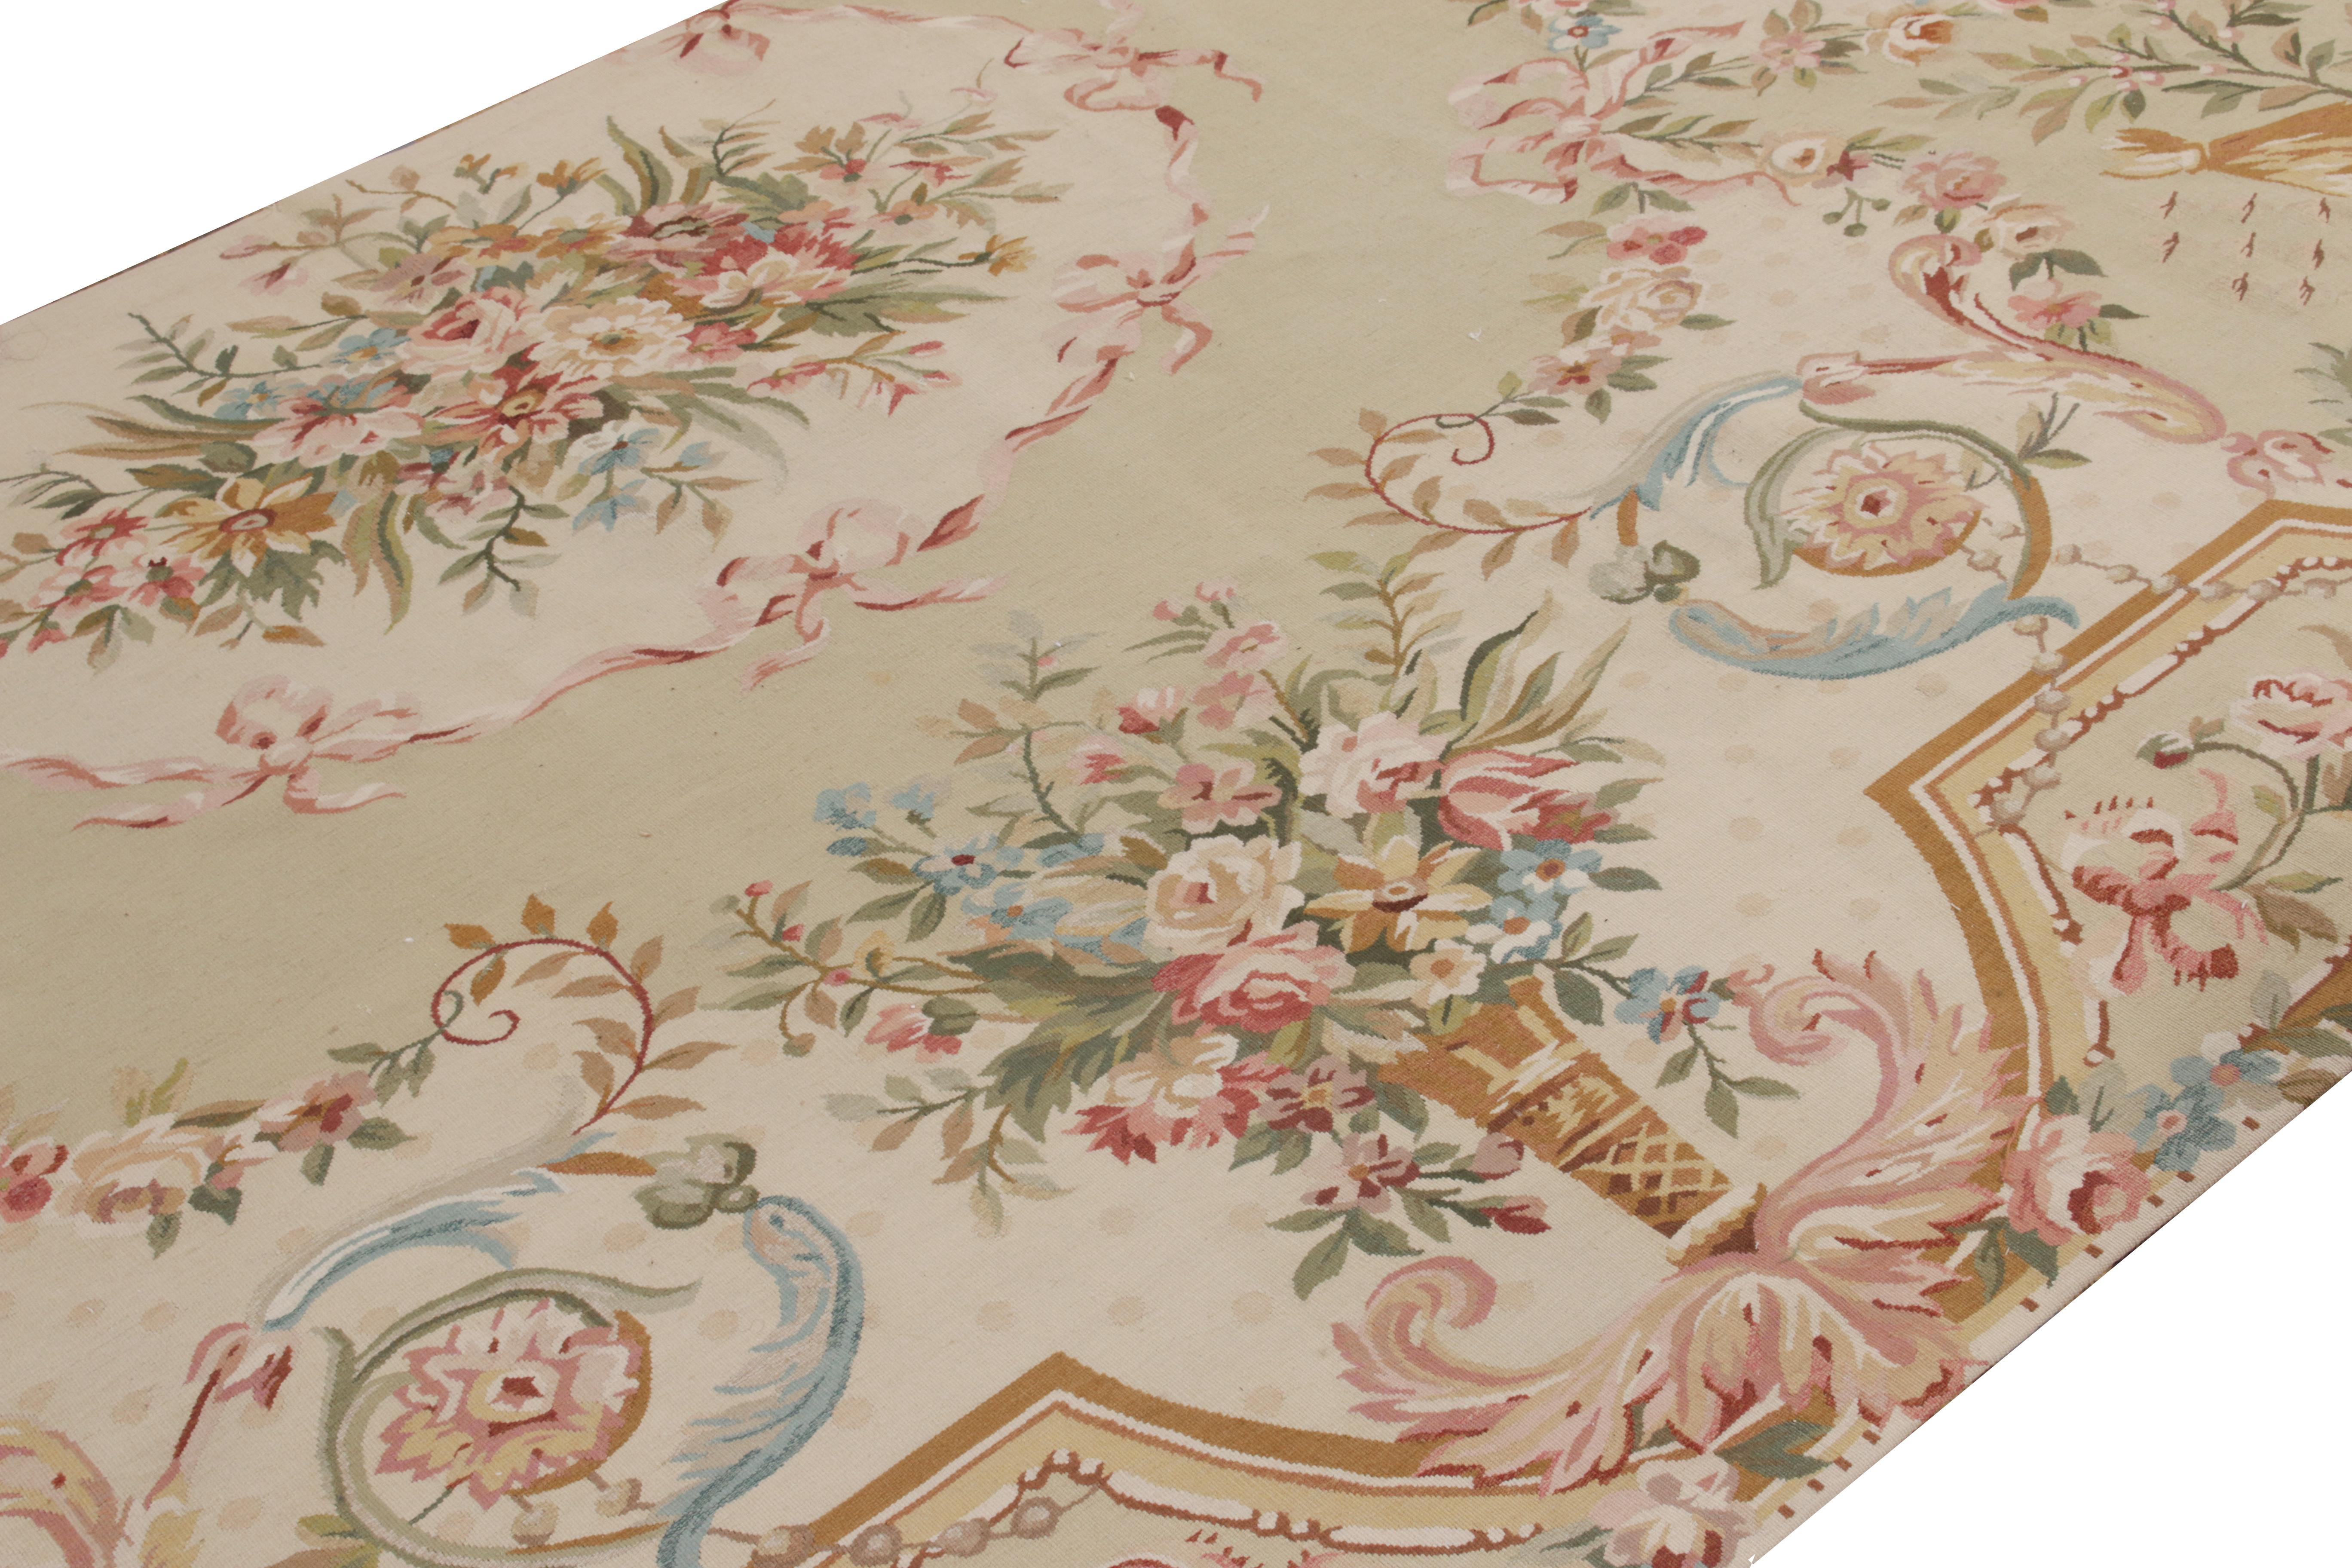 European Rug & Kilim's Handwoven Aubusson Flat Weave Style Green, Pink, Beige Floral Rug For Sale